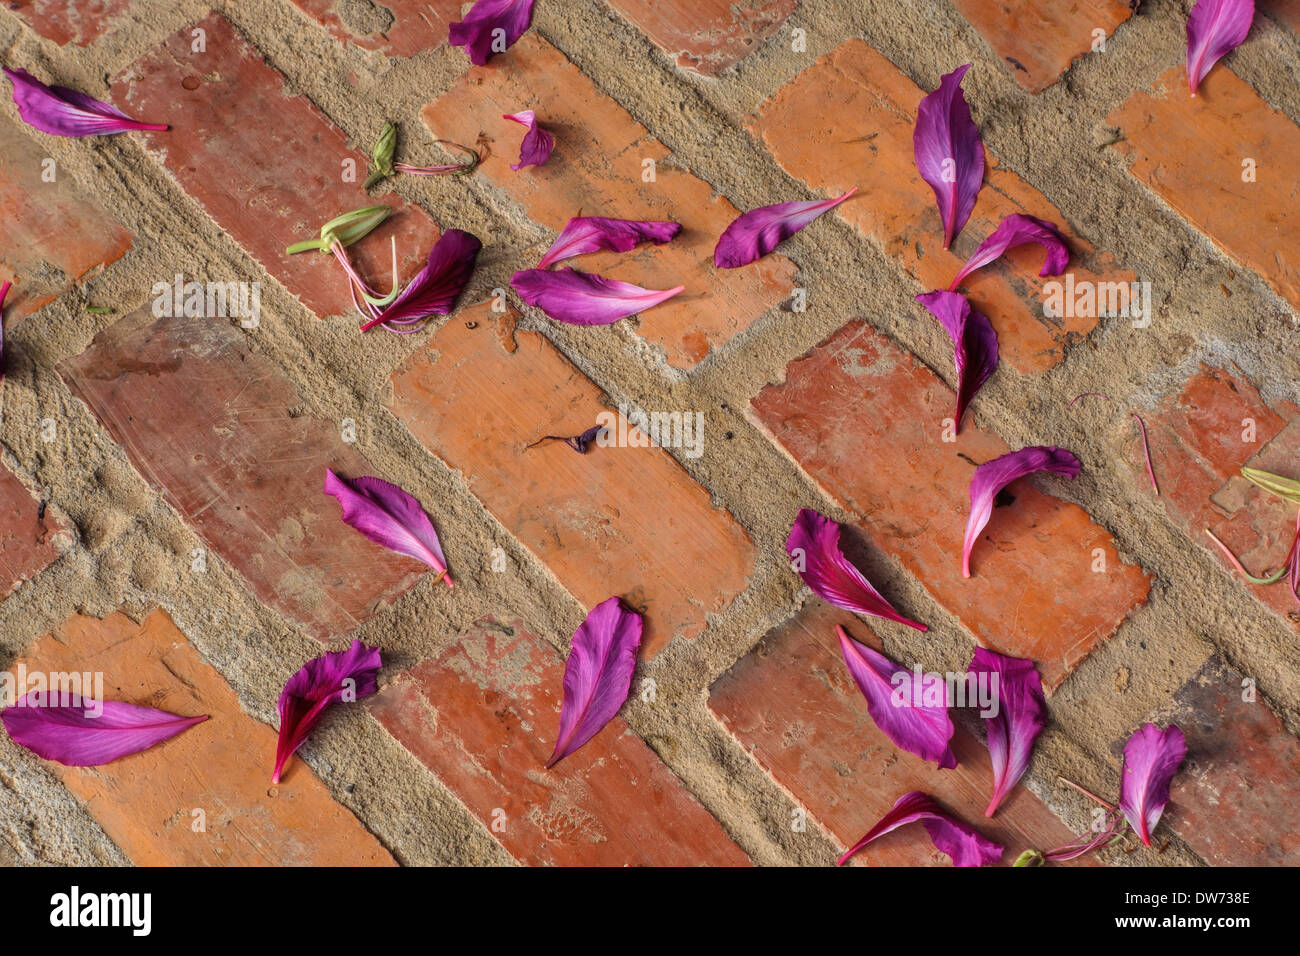 Flower pedals from a Purple Bauhinia, or Orchid tree, on bricks in Purple Bauhinia, Laos. Stock Photo